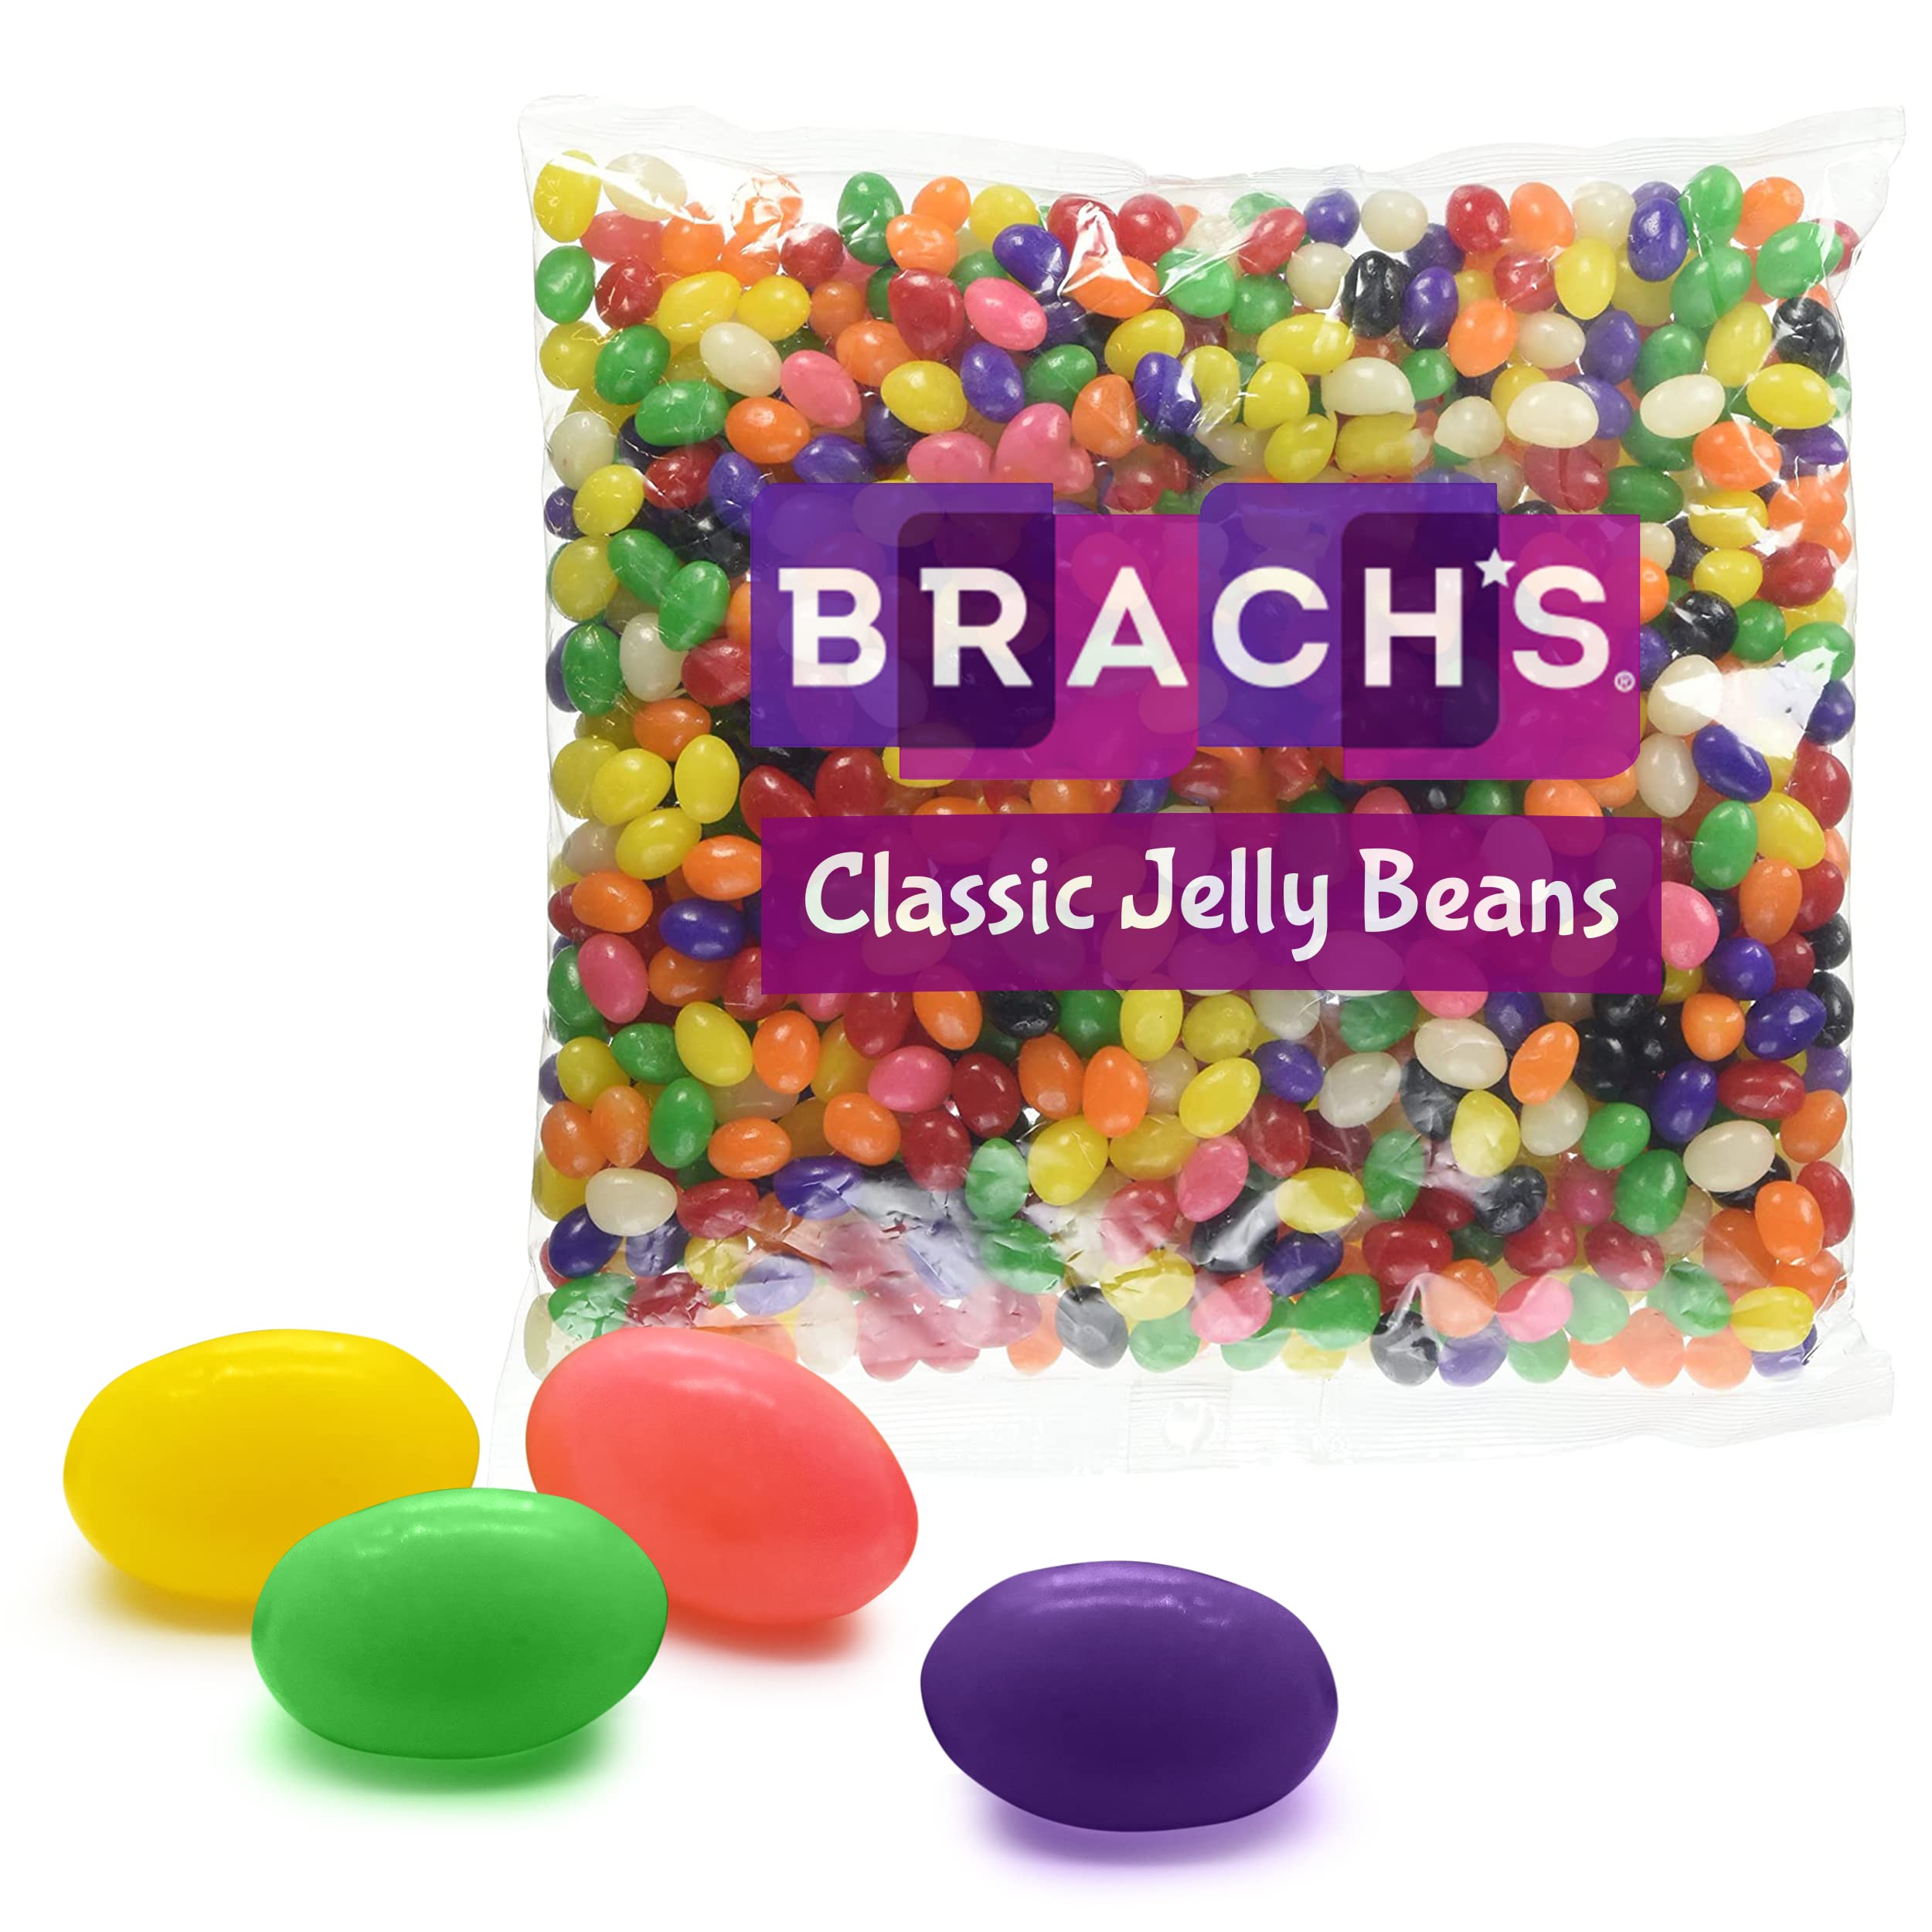 Brach's Classic Jelly Beans, Bulk Bag of Candy for Easter Eggs and Baking